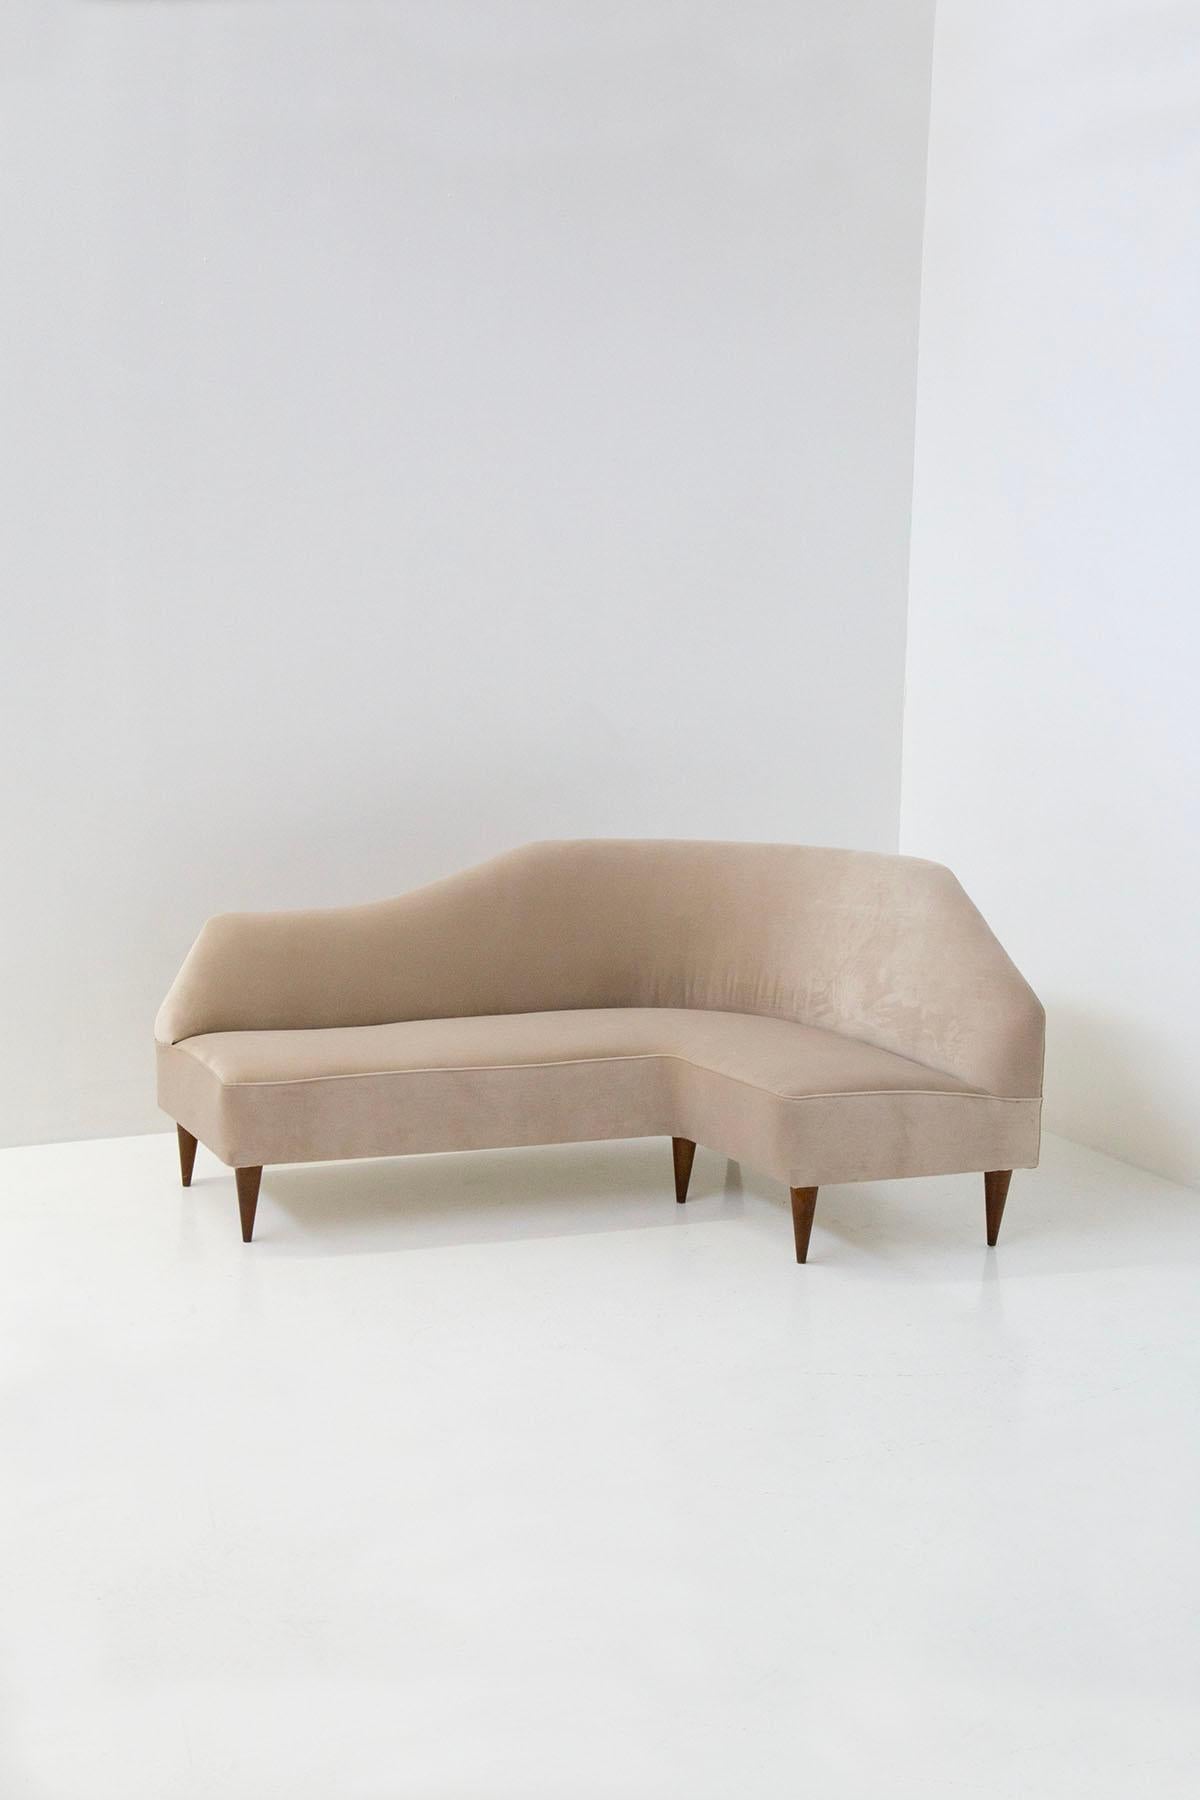 Introducing an exquisite and sophisticated asymmetrical sofa attributed to the esteemed Italian designer, Gio Ponti. Crafted in the early 1950s, this remarkable piece showcases Ponti's renowned artistic vision and impeccable craftsmanship.

The